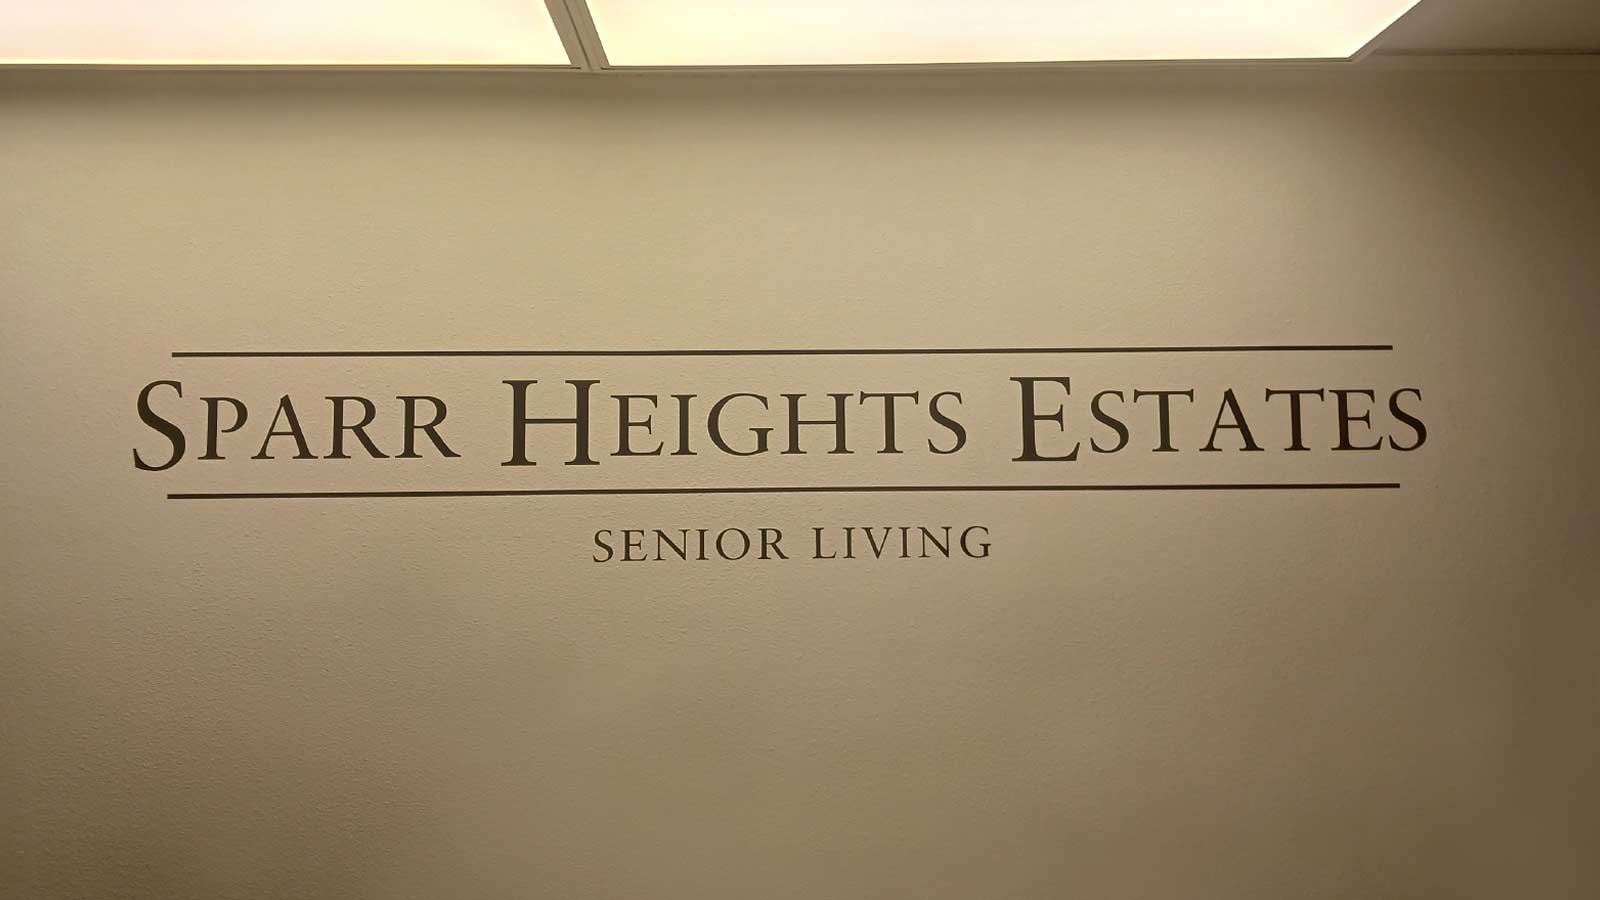 Sparr Heights Estates wall decal for interior branding